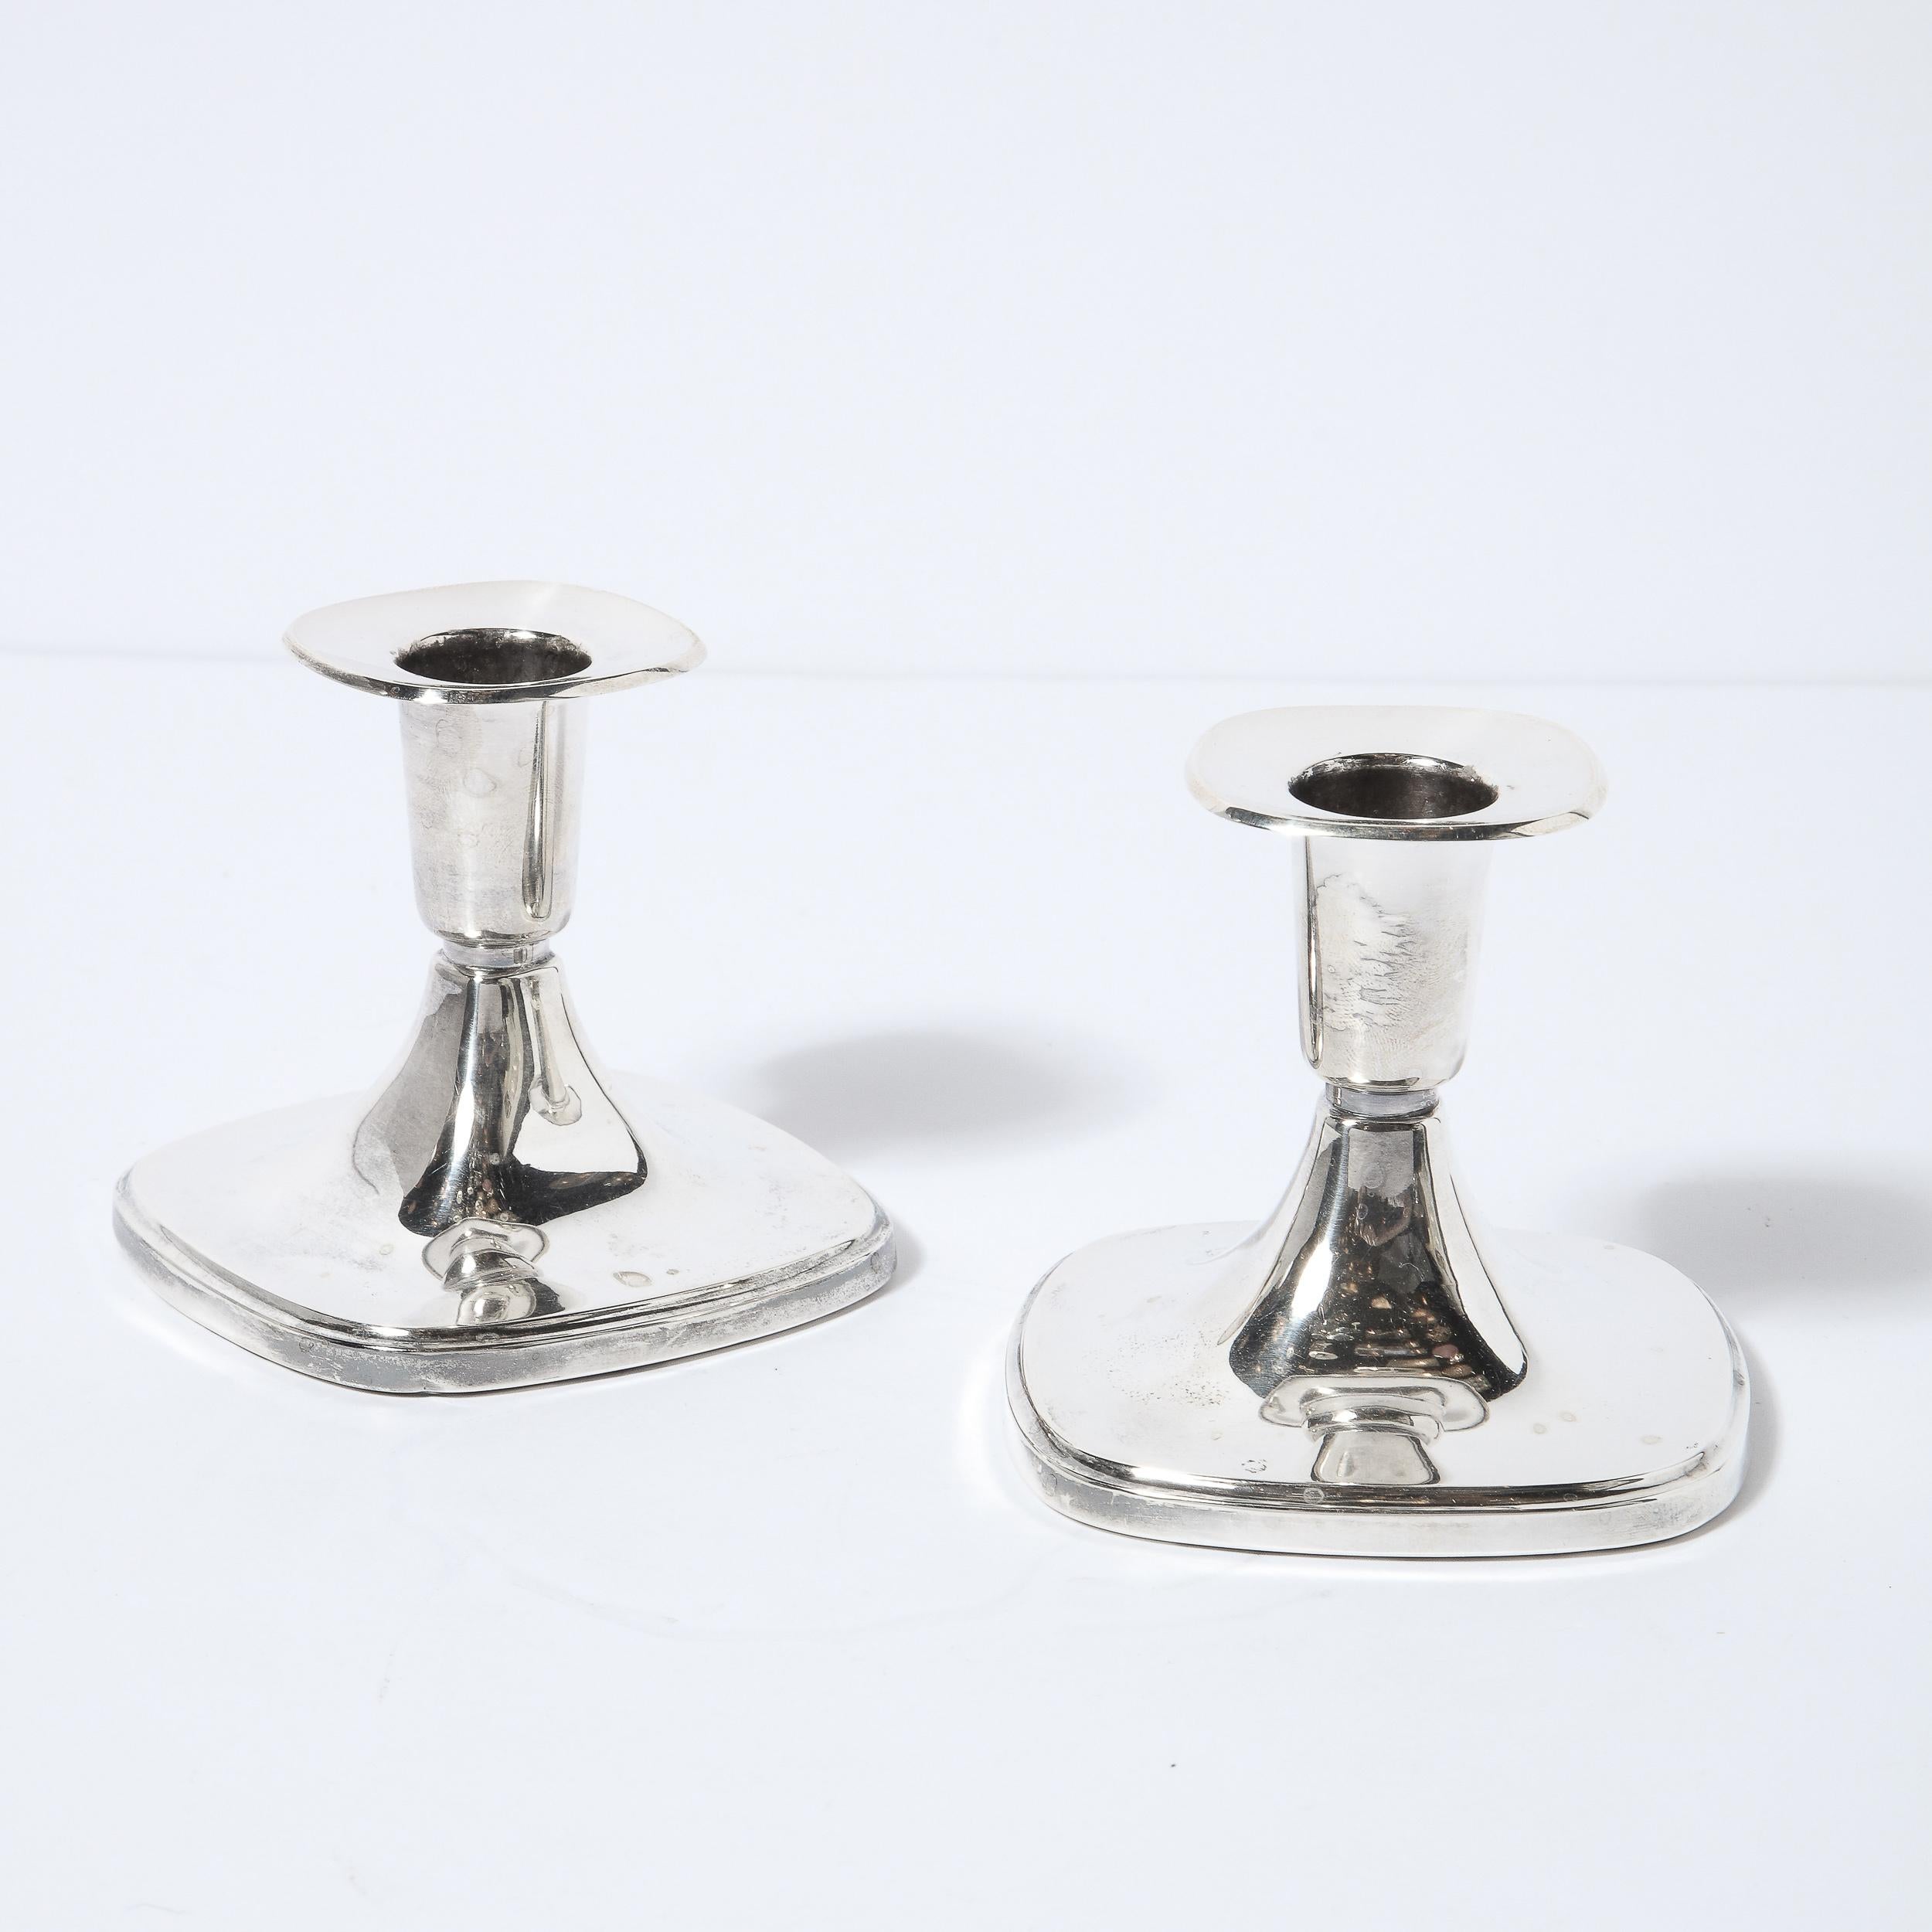 This refined pair of Mid-Century Modern candlesticks were realized in the United States, circa 1960. They feature four sided bases with rounded corners that taper upwards to a bobeche of the same form- all in lustrous sterling silver. With their